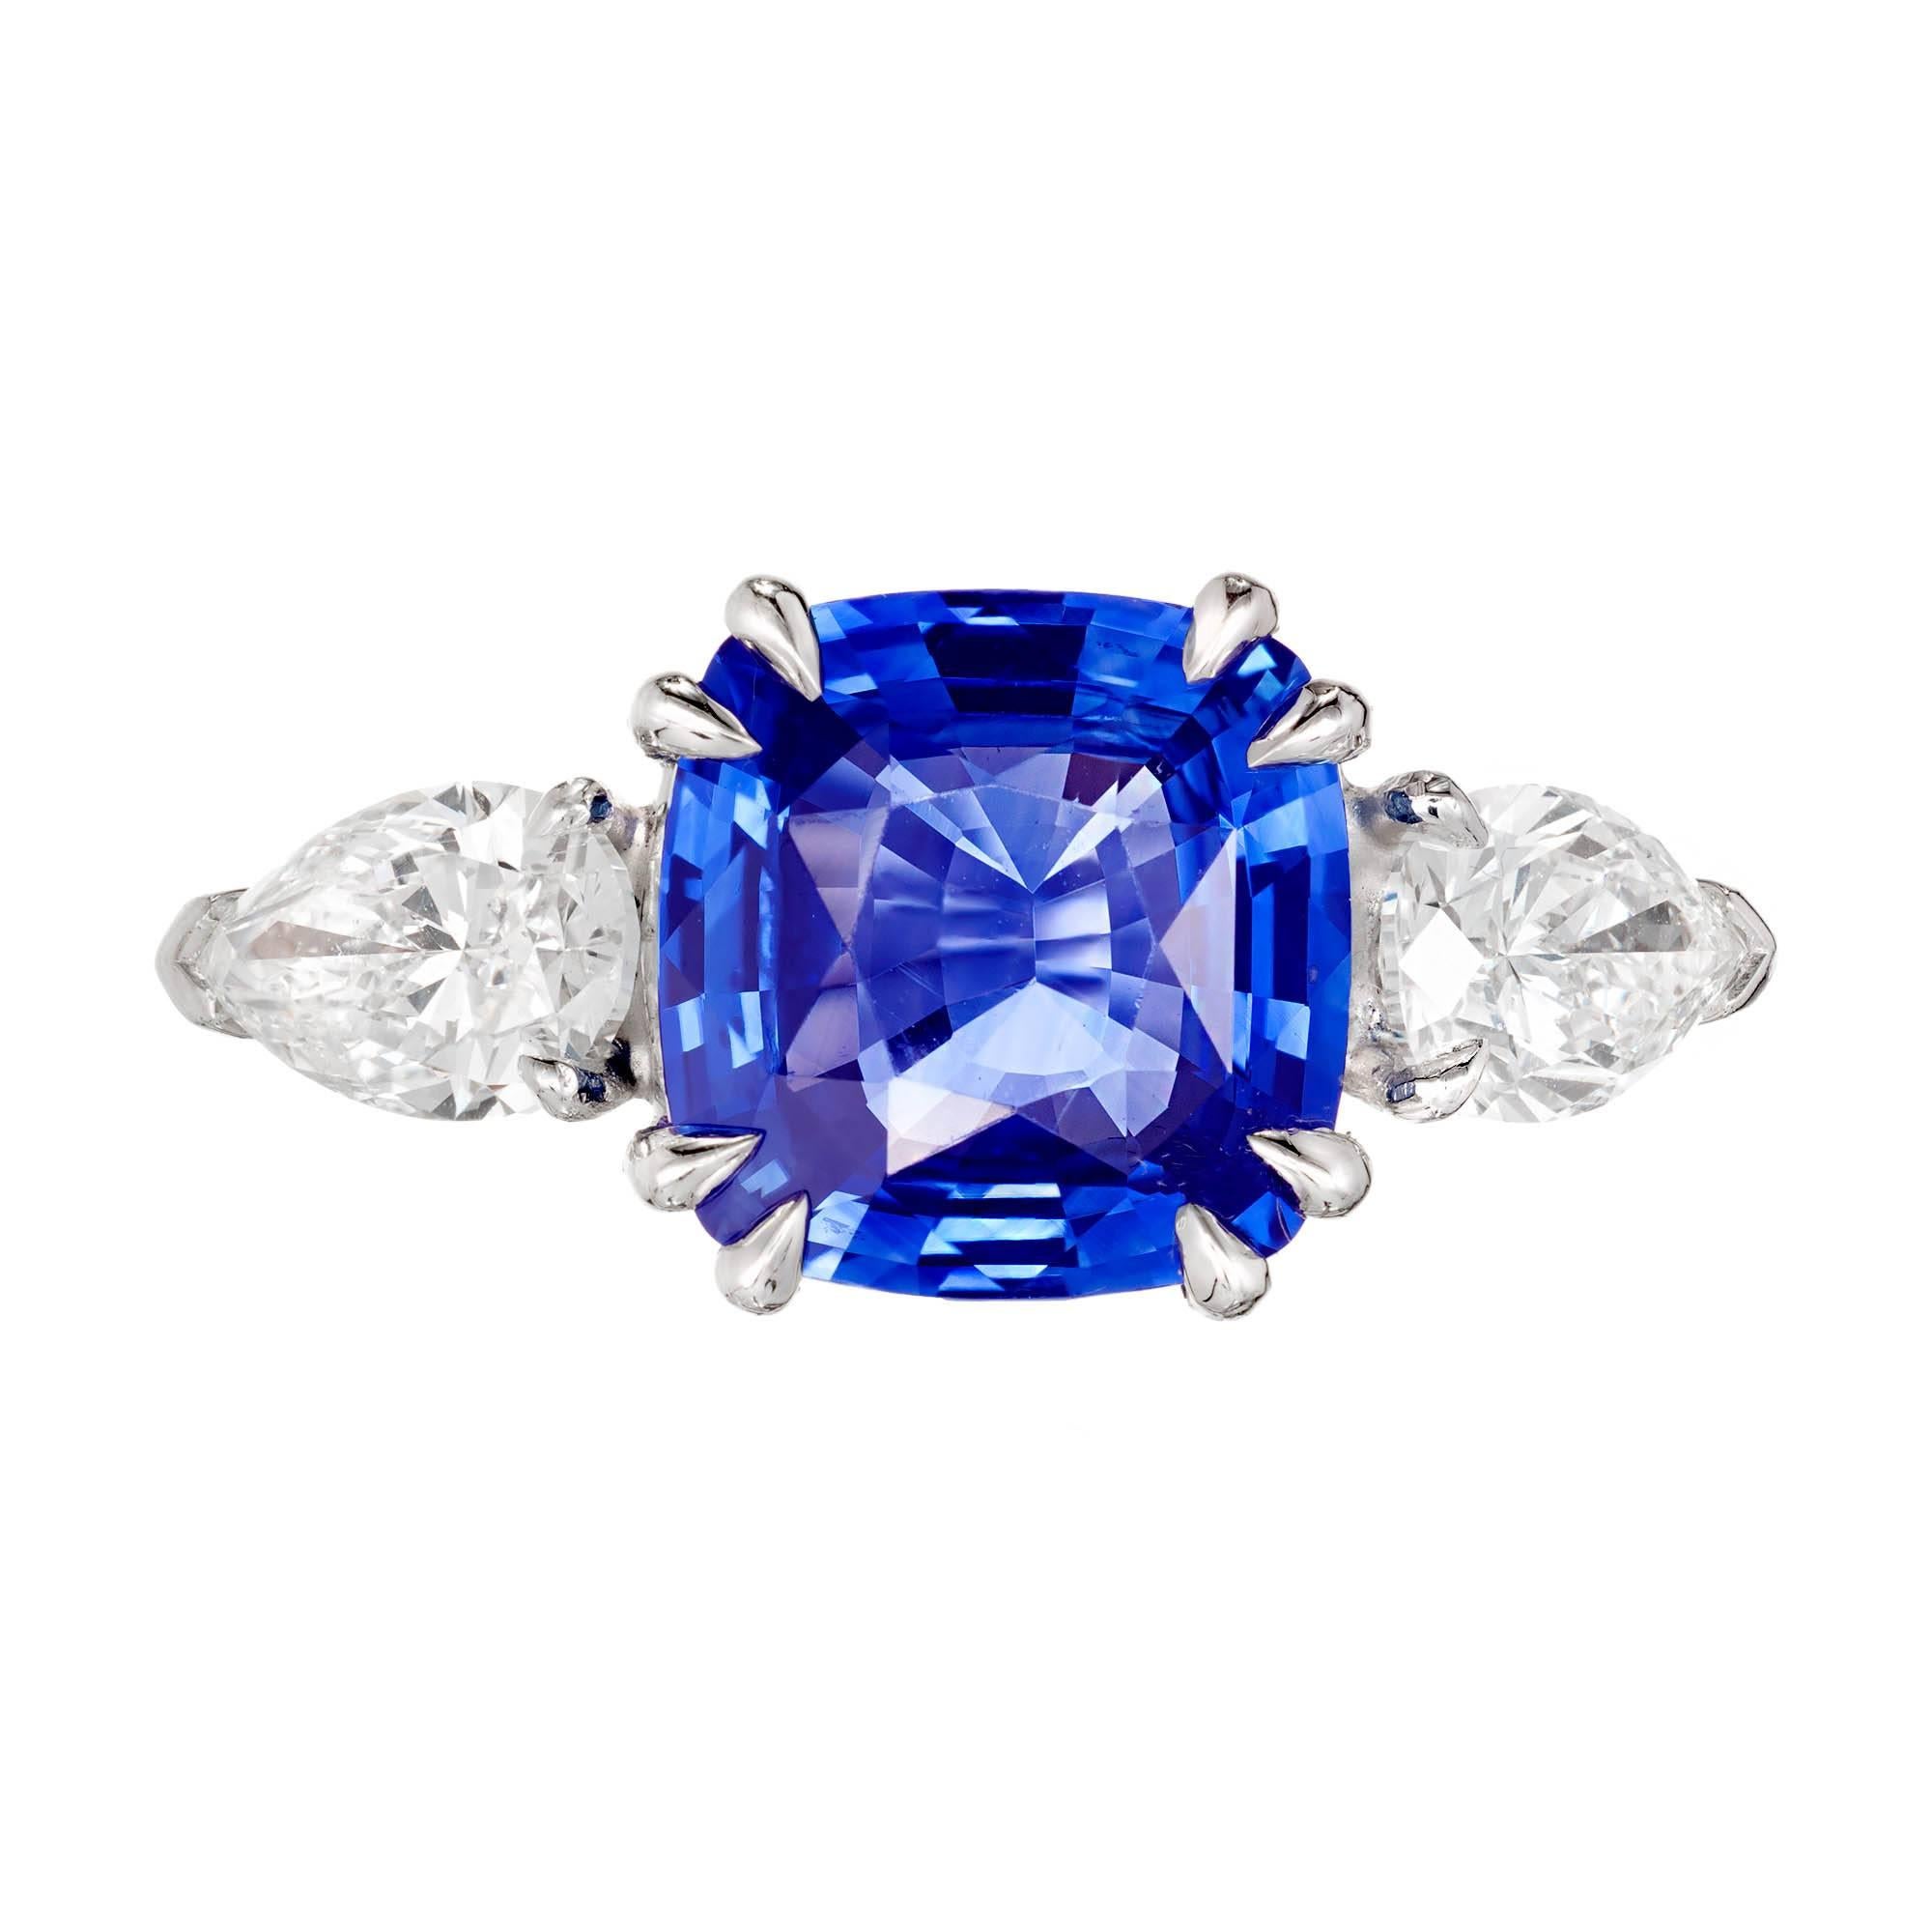 Peter Suchy Sapphire Diamond Three Stone Platinum Engagement Ring. Made in Peter Suchy Workshop. Center stone AGL certified. 2 pear shaped GIA certified side diamonds.

1 cushion cut bright blue Sapphire, approx. total weight 4.50cts, simple heat,